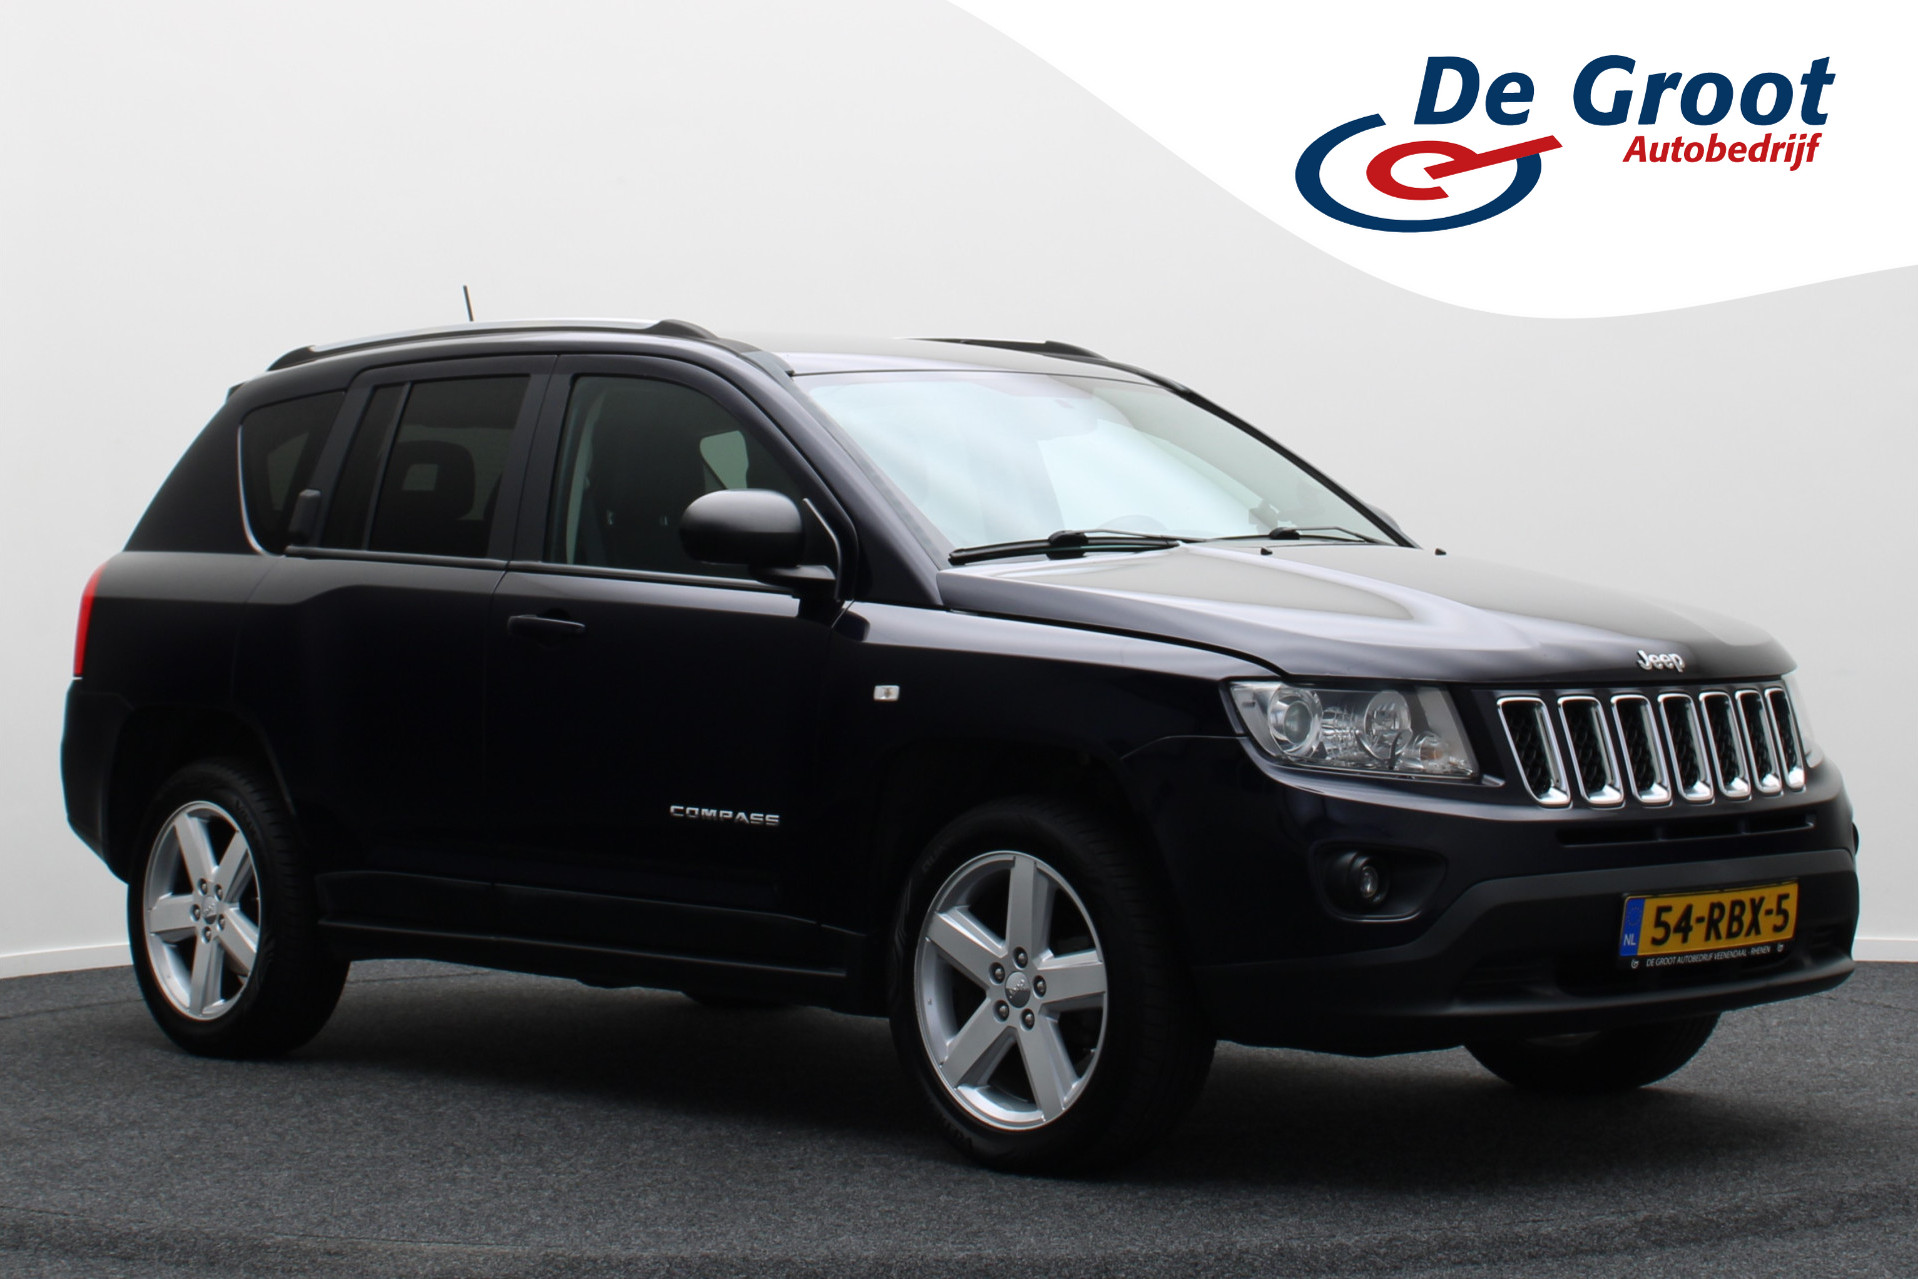 Jeep Compass 2.4 Limited 4WD Automaat Leer, Stoelverw., Climate, Cruise, Navigatie, Bluetooth, 18''